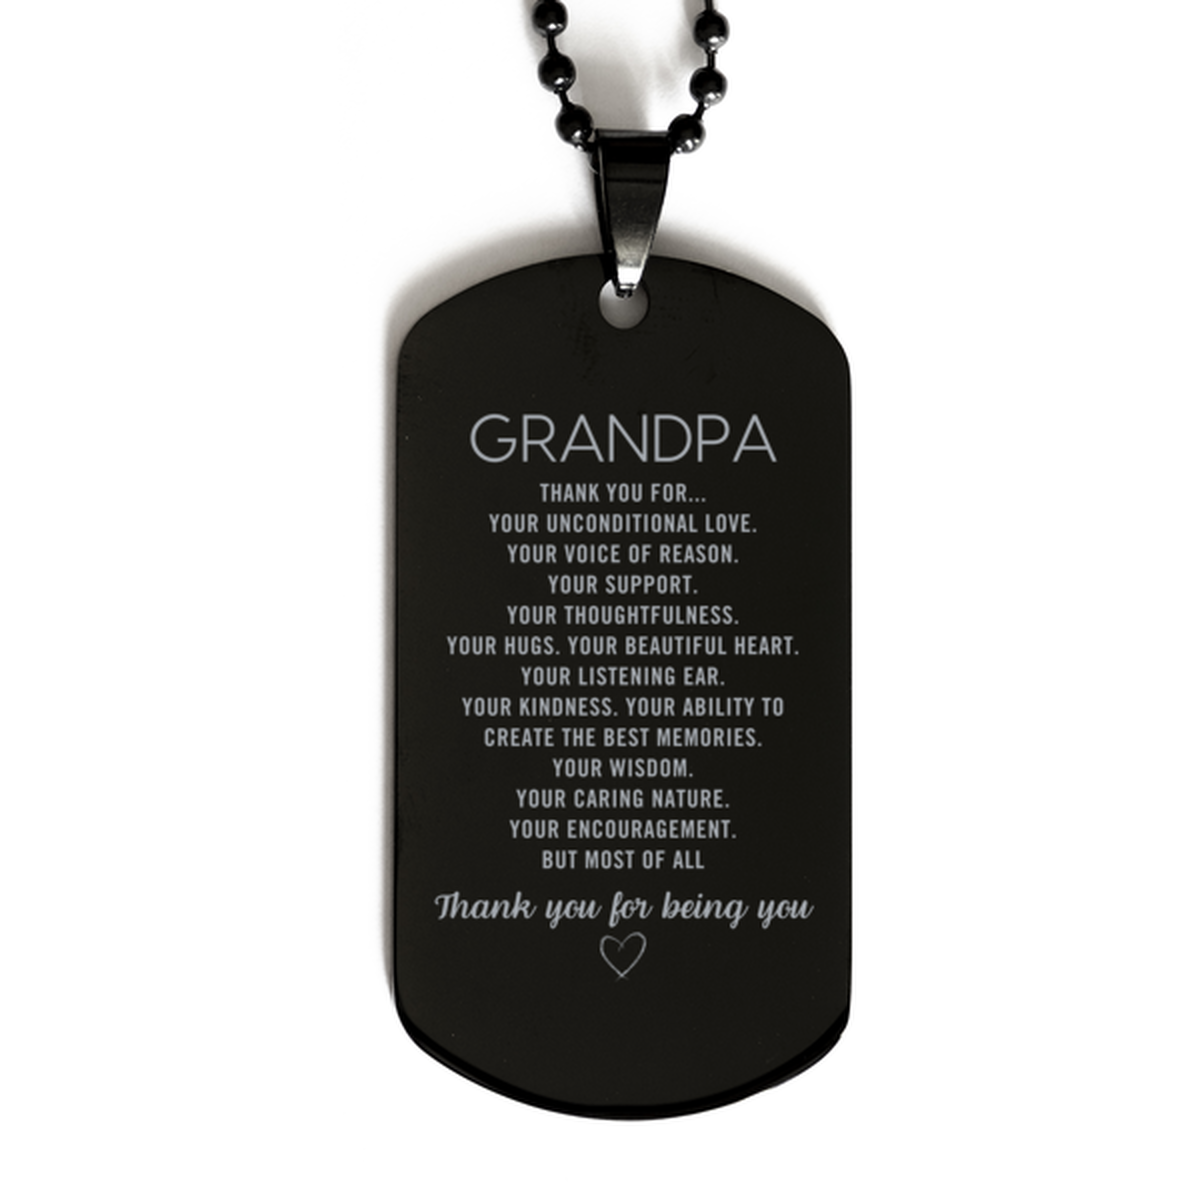 Grandpa Black Dog Tag Custom, Engraved Gifts For Grandpa Christmas Graduation Birthday Gifts for Men Women Grandpa Thank you for Your unconditional love